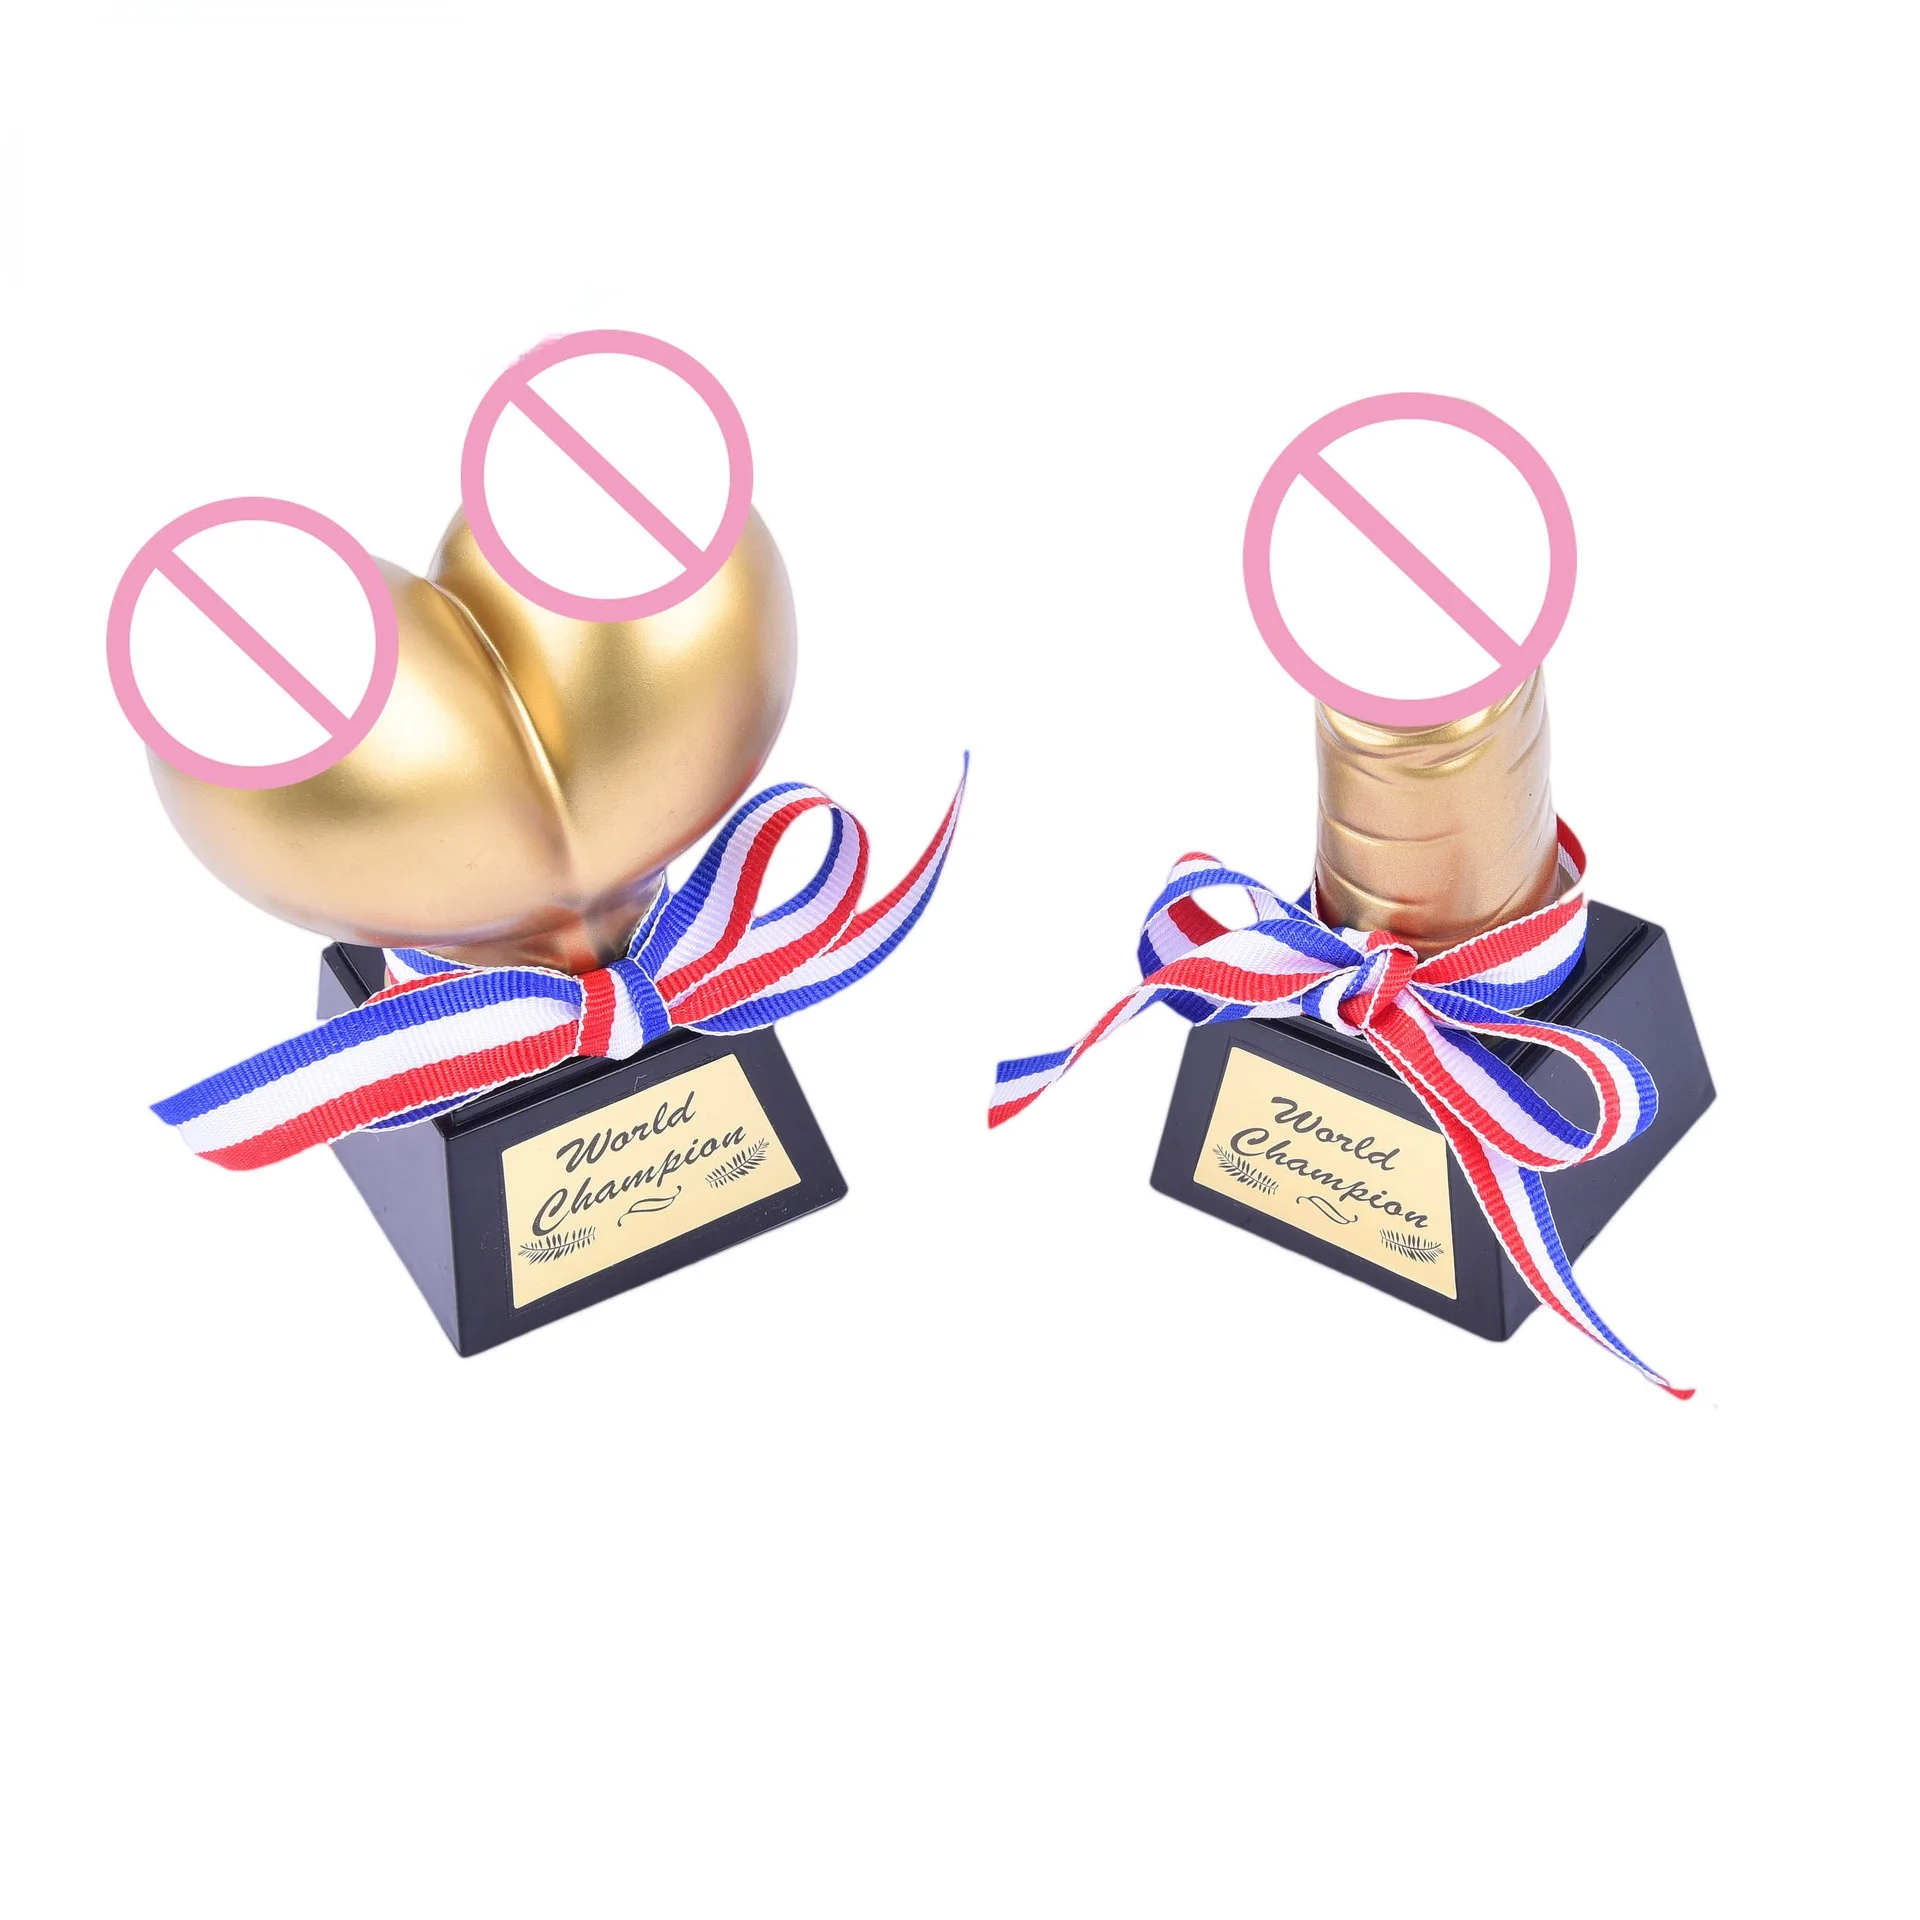 

Bachelor Party Accessories Creative Penis Trophy Novelty Golden Hen Stag Party Trophy Prop Adult Joke Toy Toys Birthday Gifts